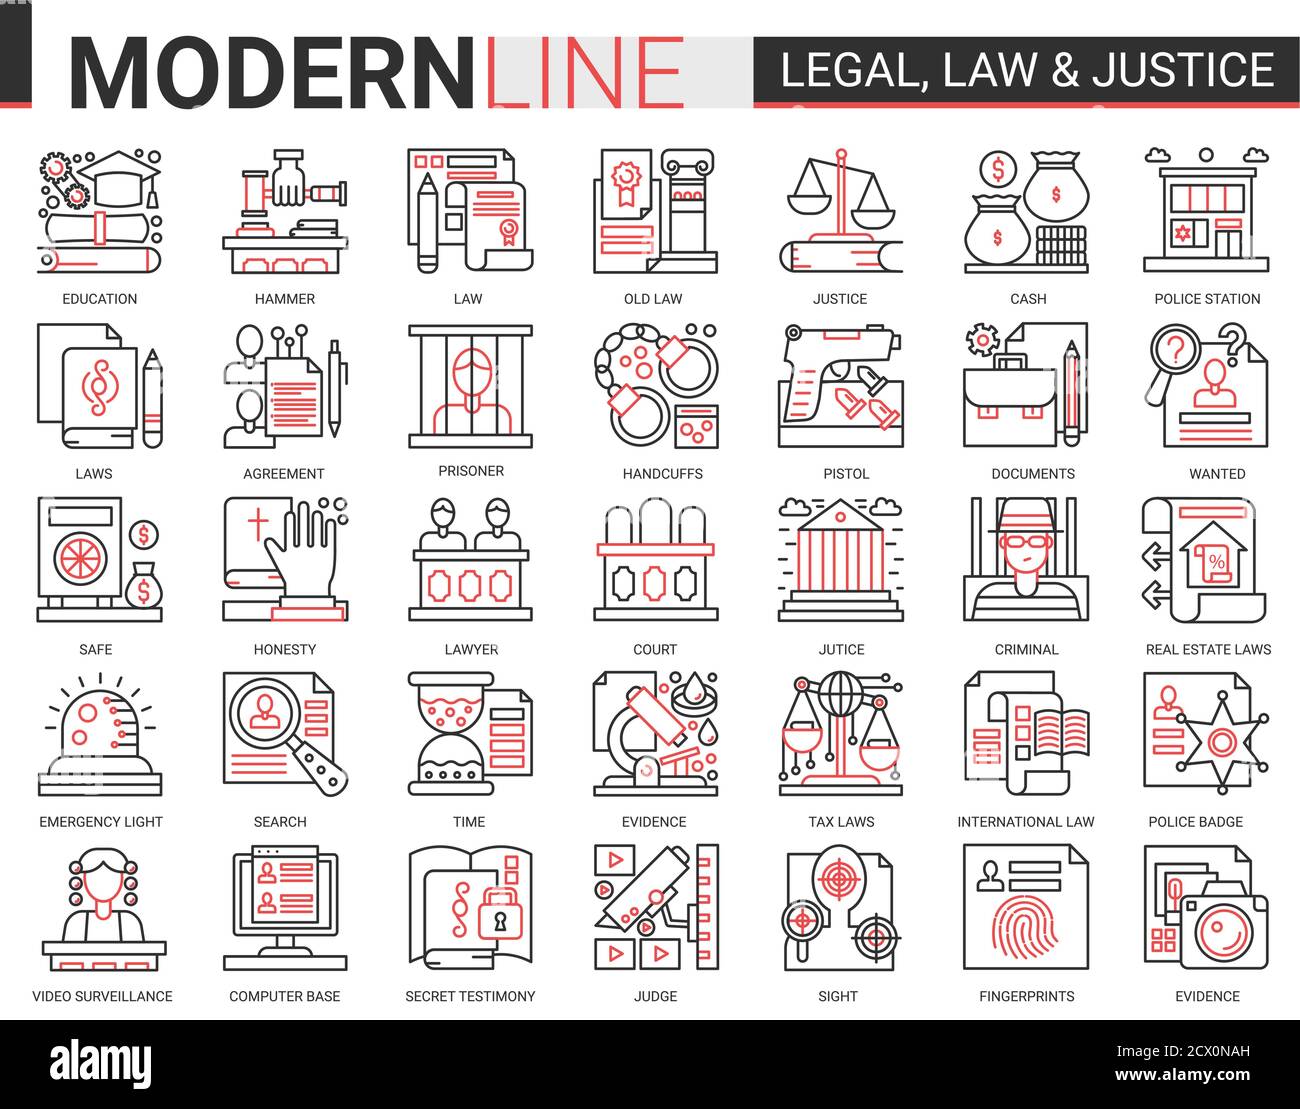 Legal law and justice concept complex icon vector set. Red black thin line infographic design of mobile app website symbols with judicial legislation education, lawyer defense, police investigation Stock Vector